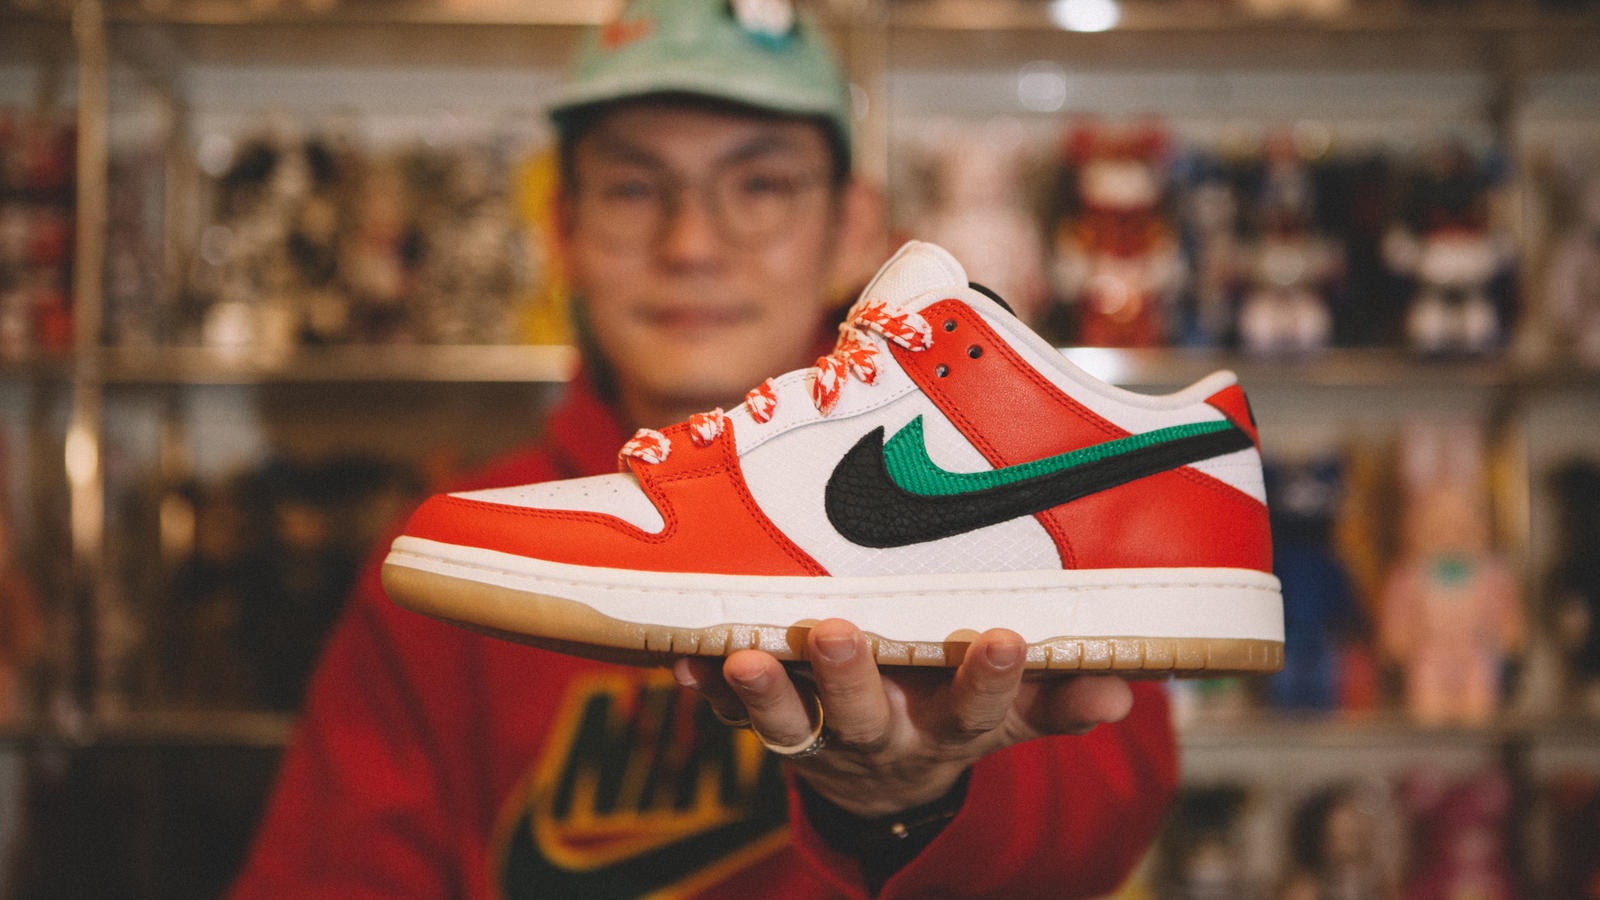 Nike SB's 'Habibi' Dunk Low sneaker is an ode to the Middle East